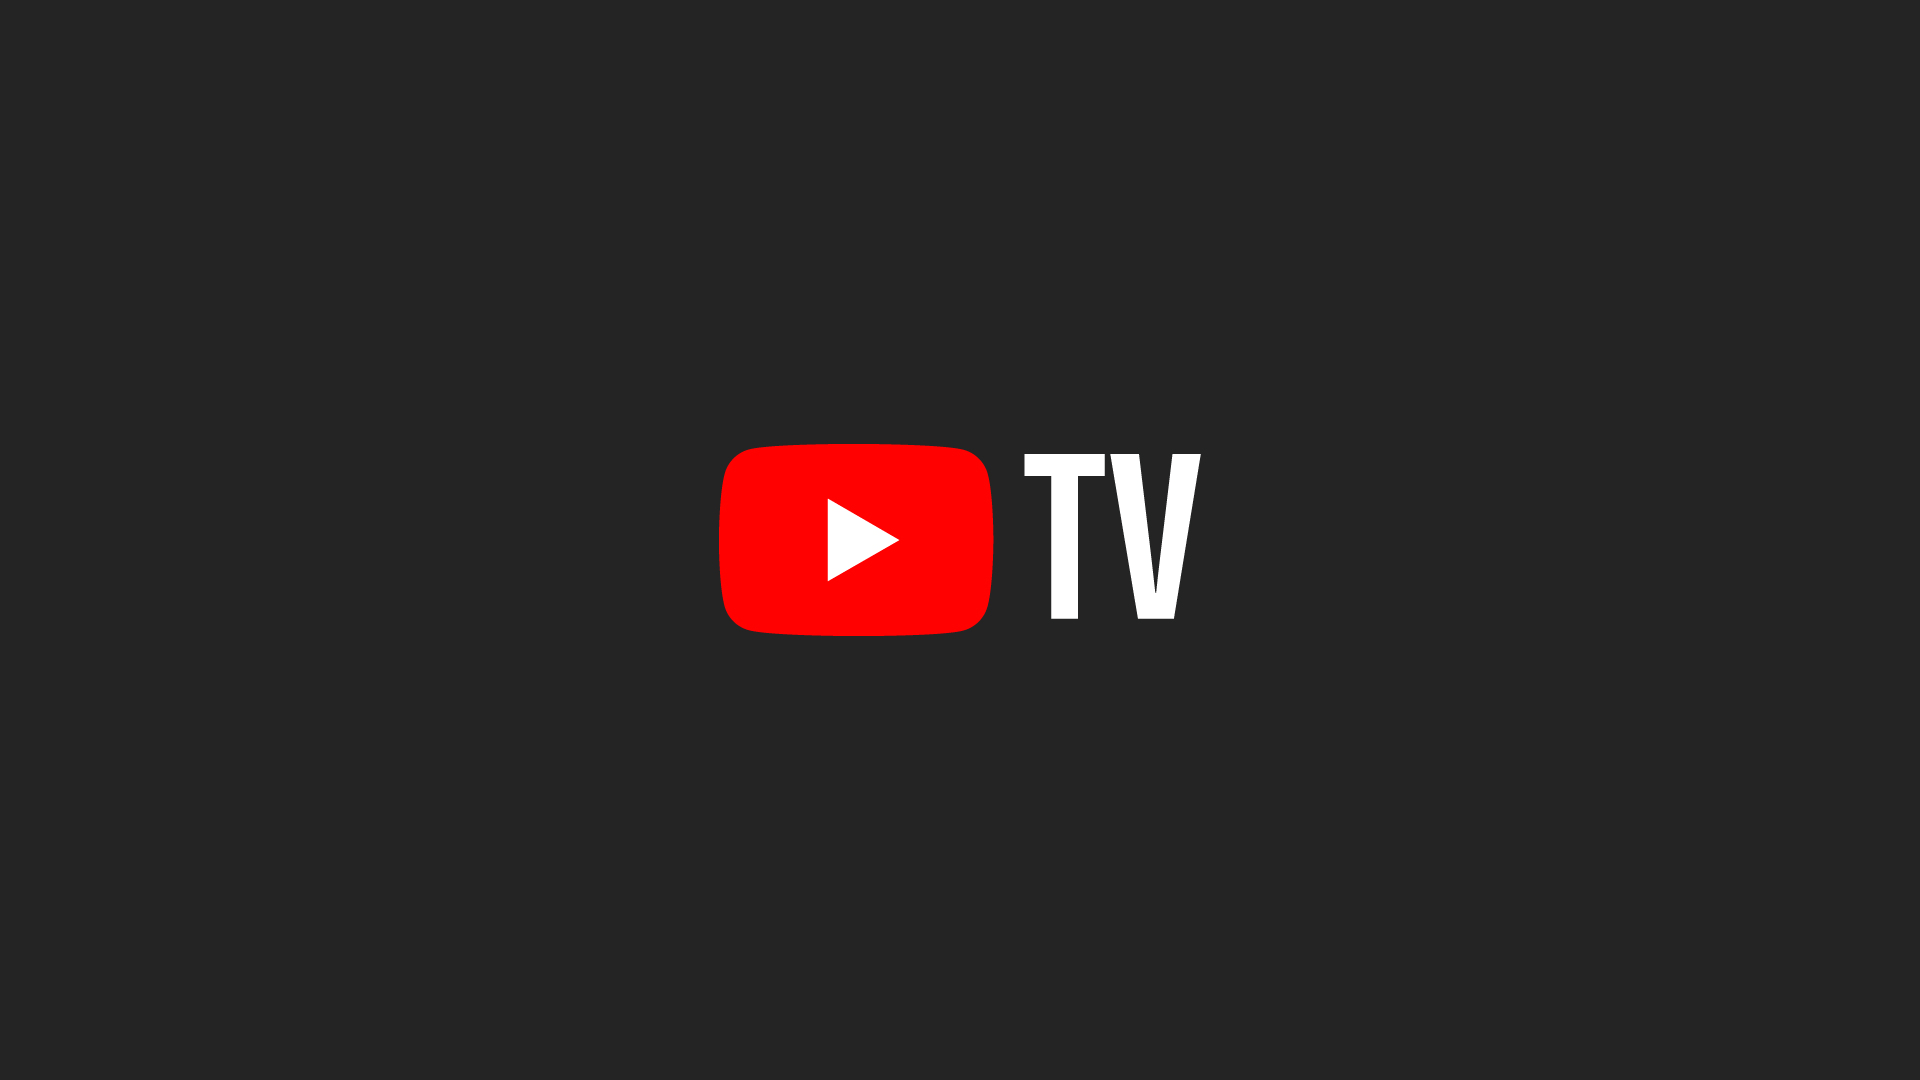 YouTube TV Now Offers a $20 Refer-A-Friend Credit